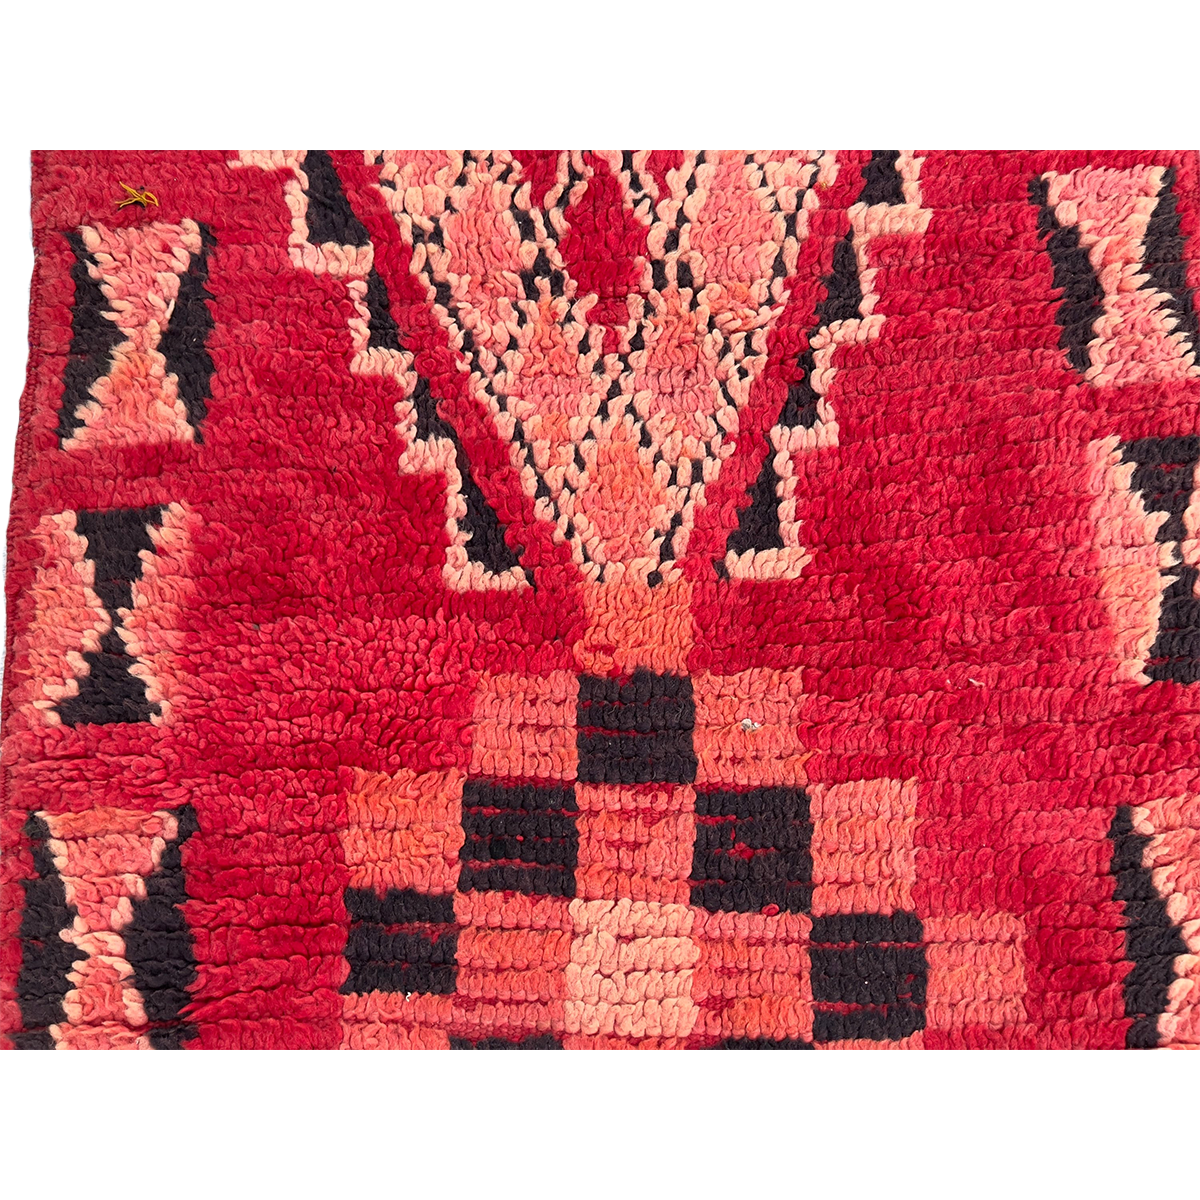 Guides Moroccan Rugs